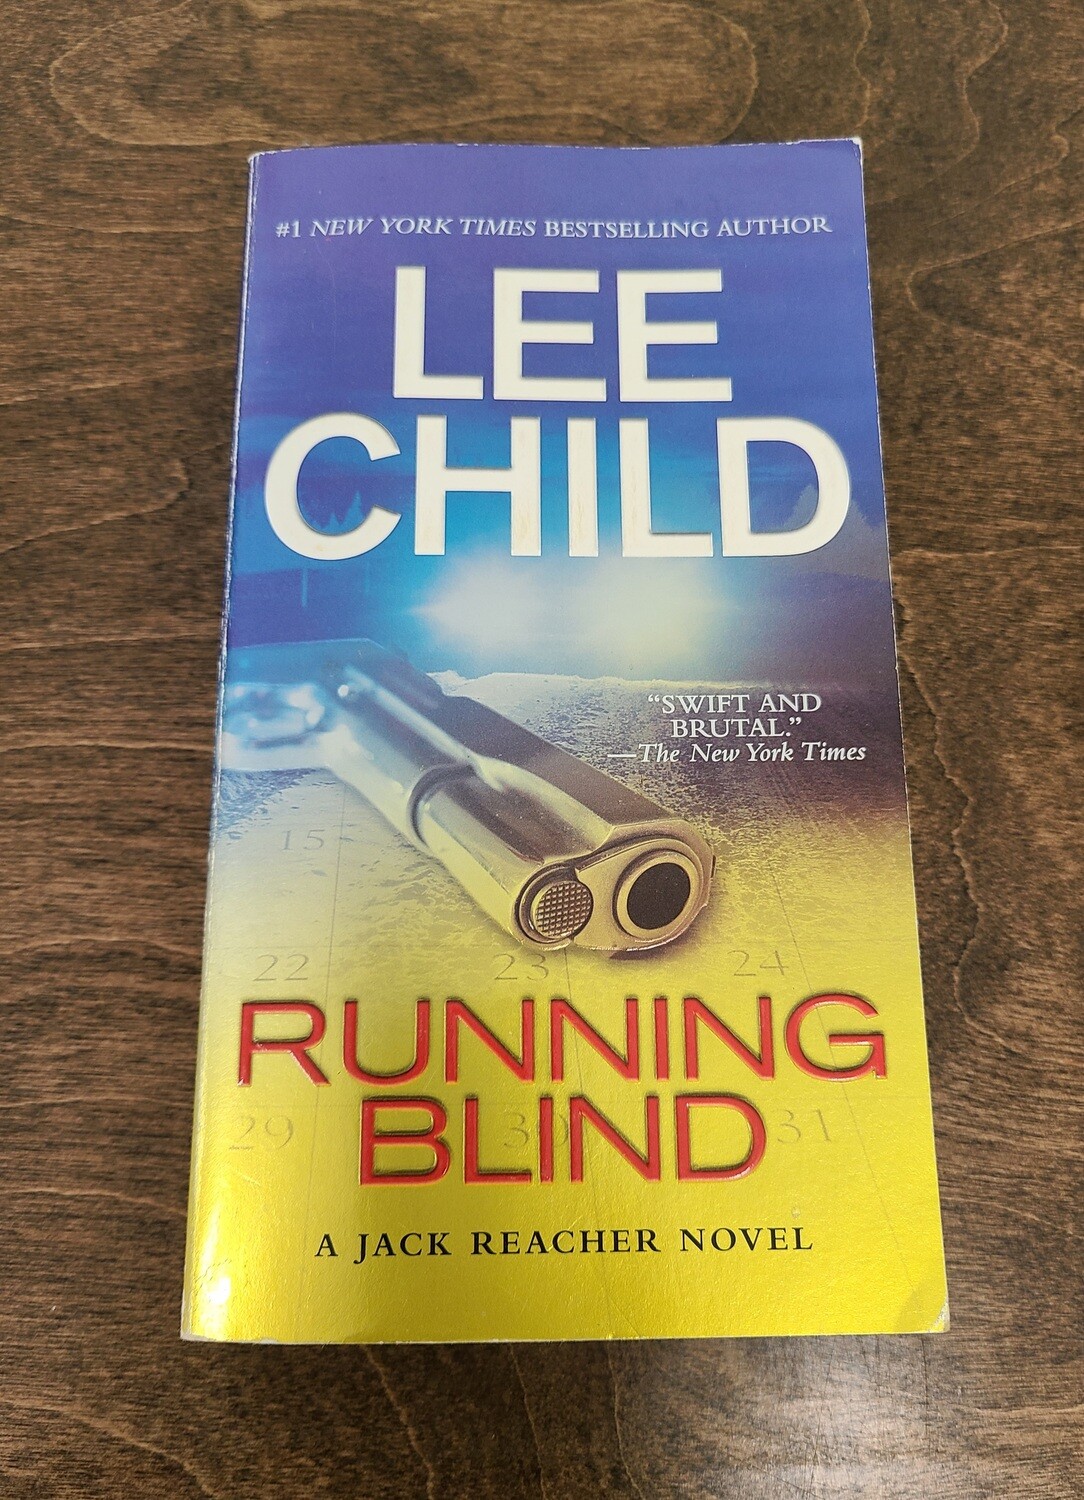 Running Blind by Lee Child